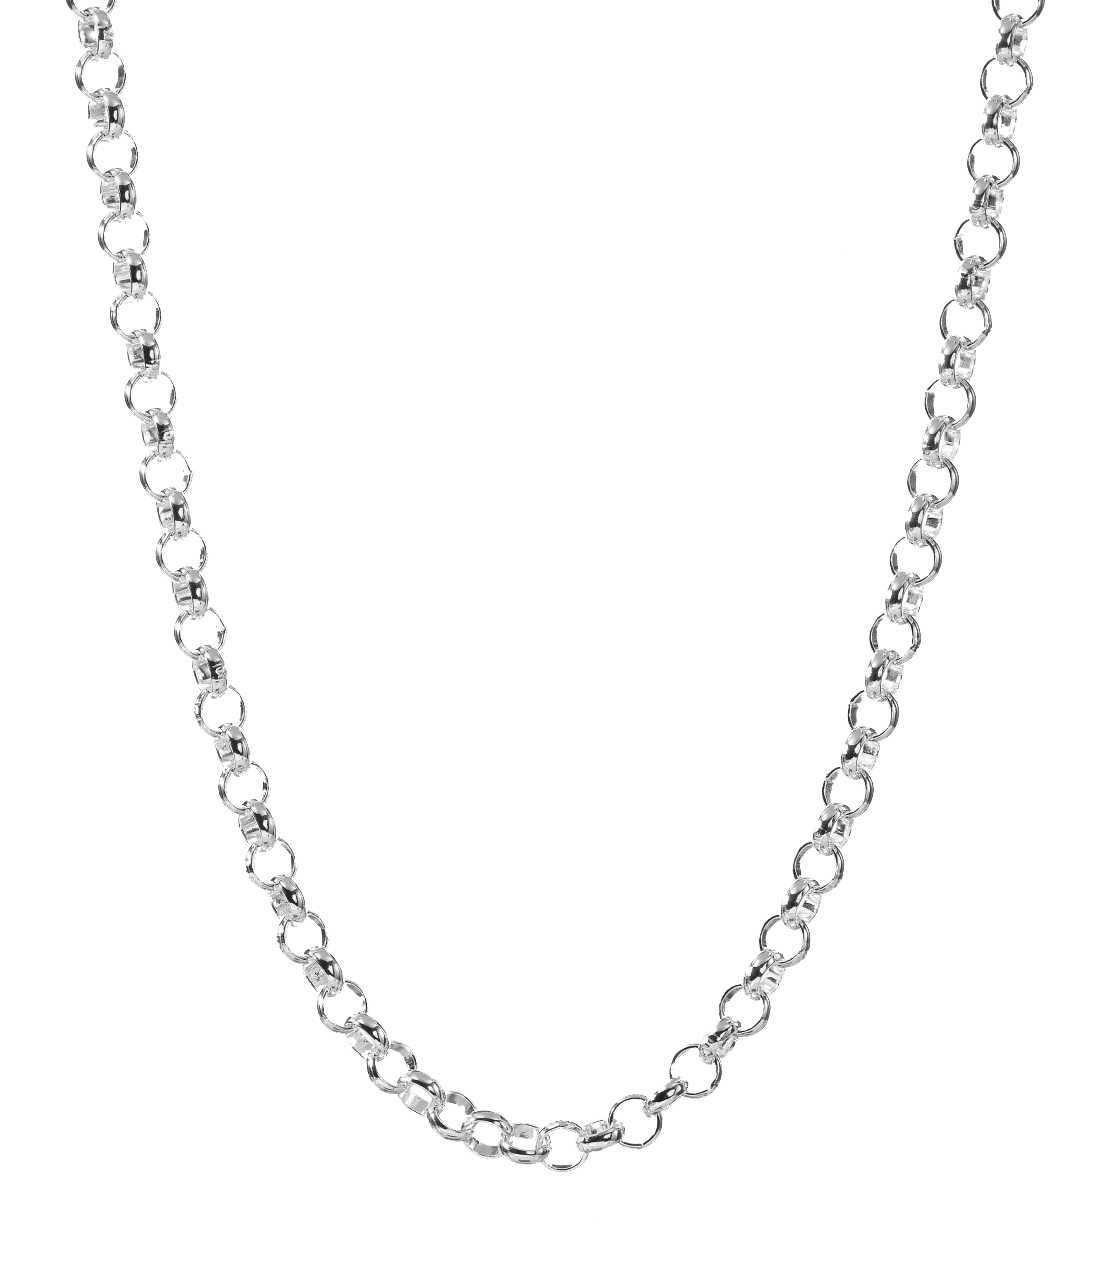 Chain Png Pic PNG Image